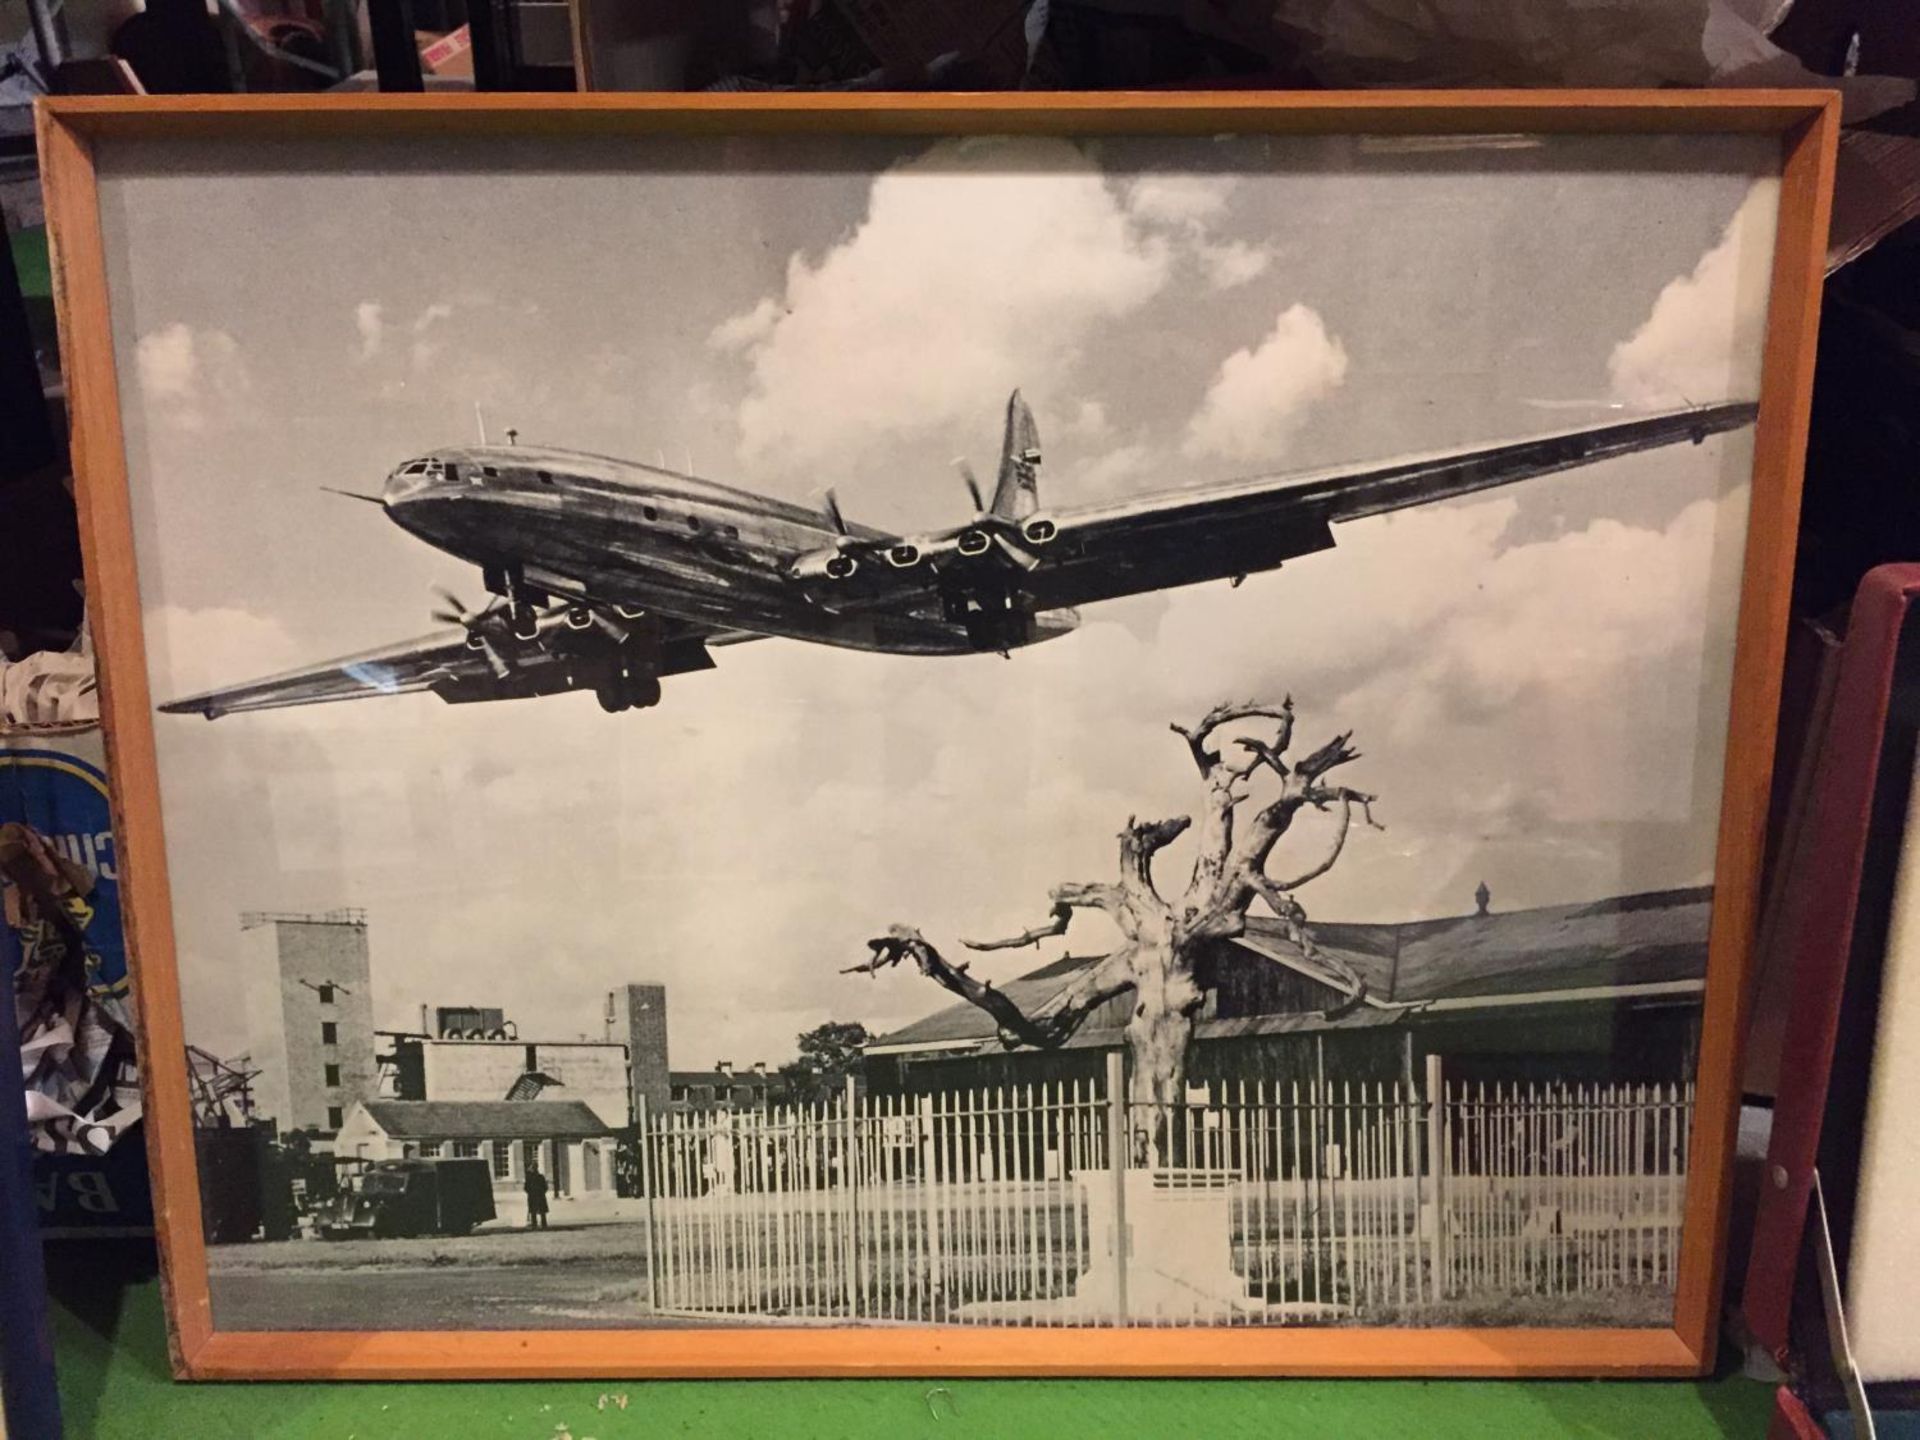 A FRAMED BLACK AND WHITE PHOTOGRAPH ON AN AEROPLANE TAKING OFF